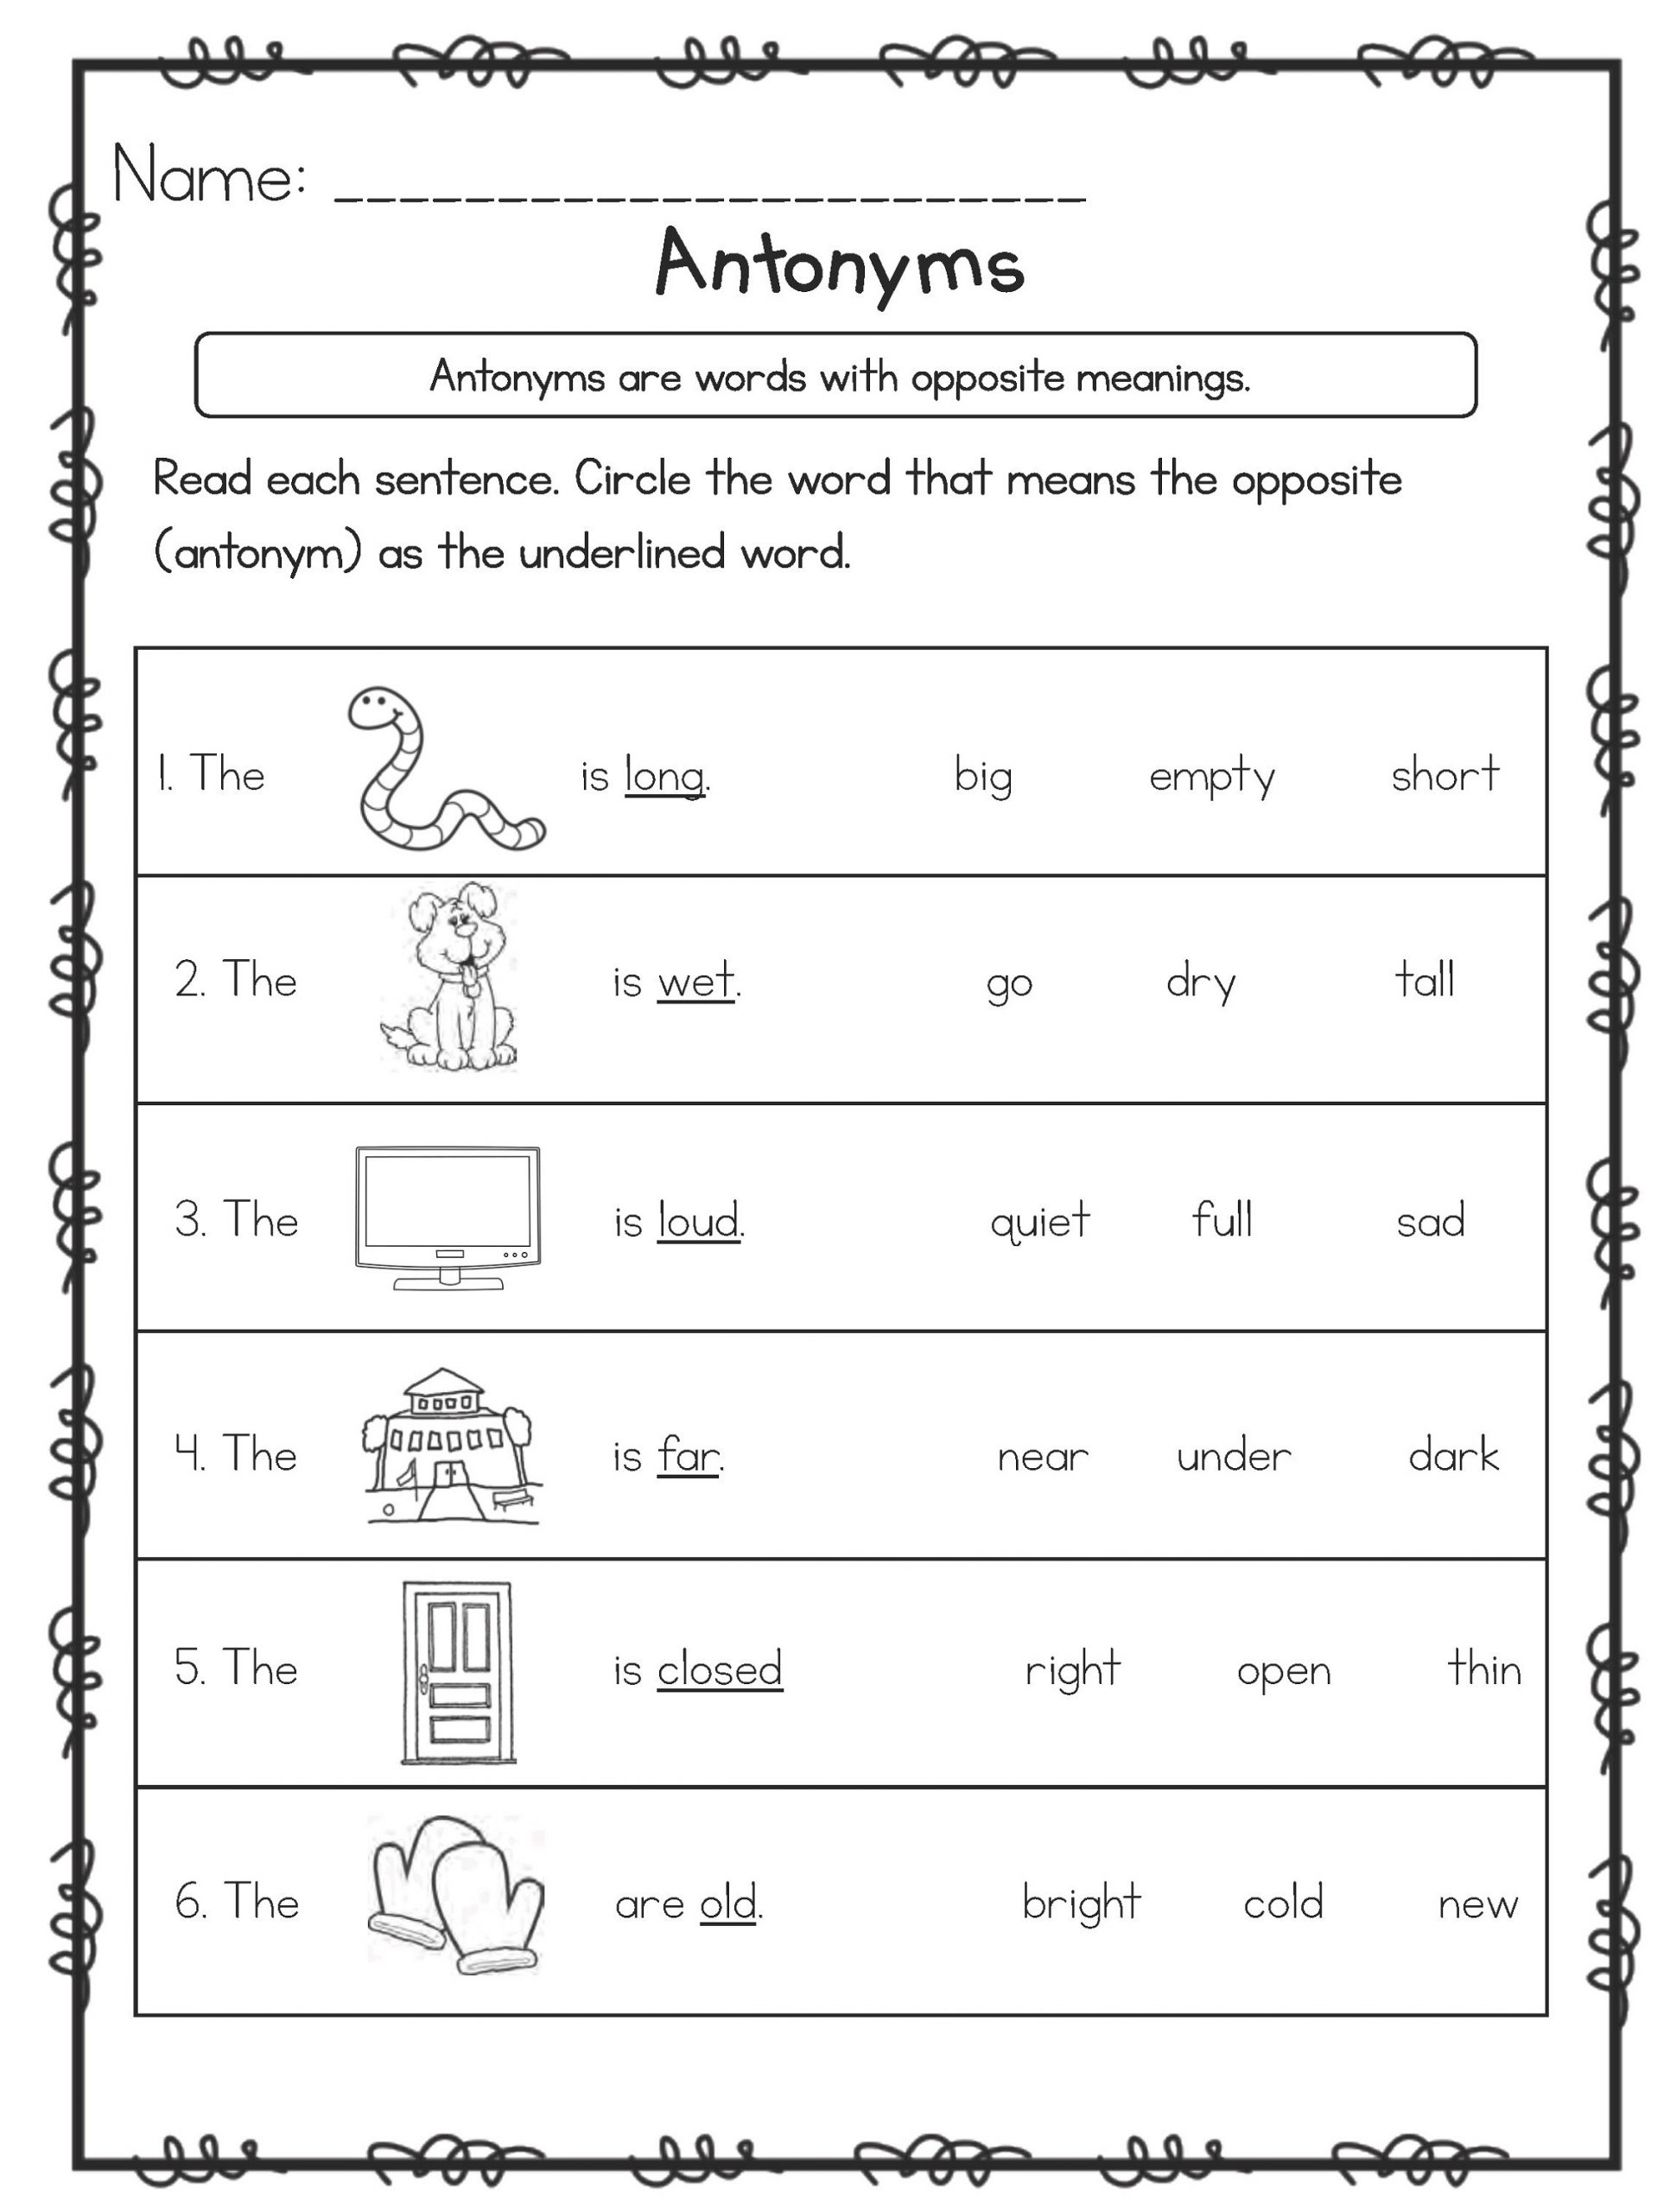 Antonyms Worksheets For 5 Year Olds